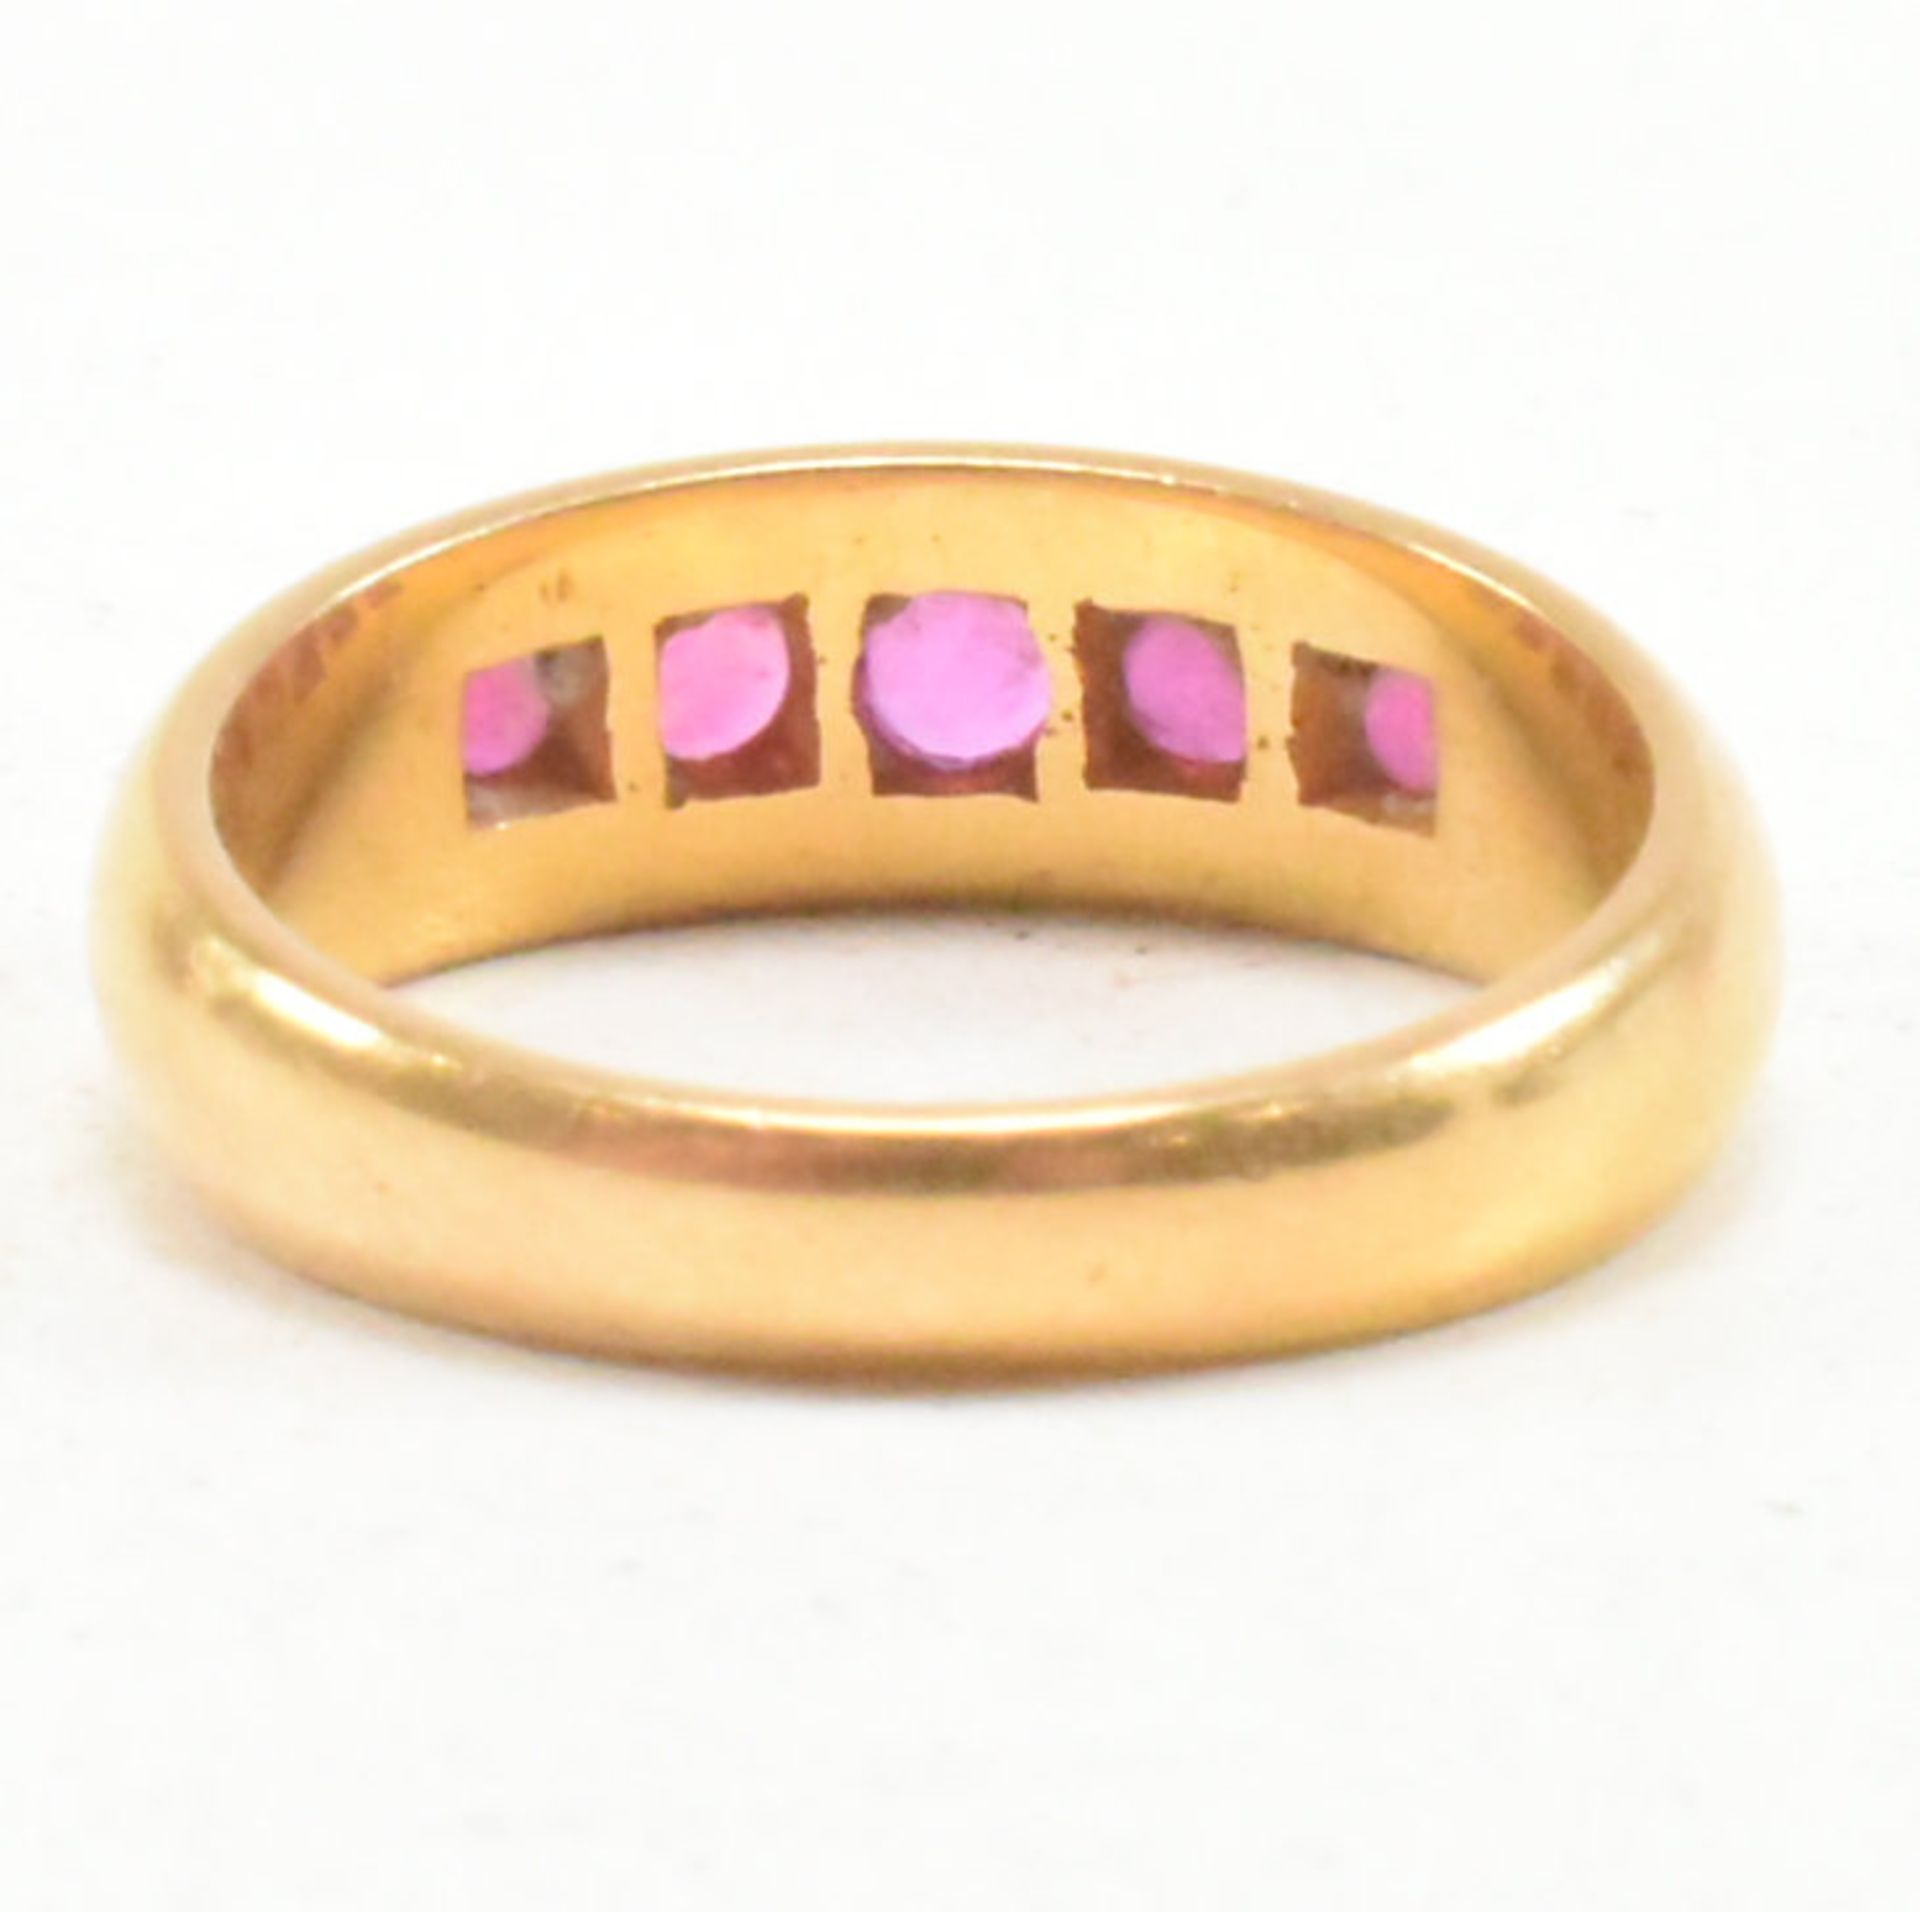 GOLD & RUBY FIVE STONE RING - Image 5 of 7